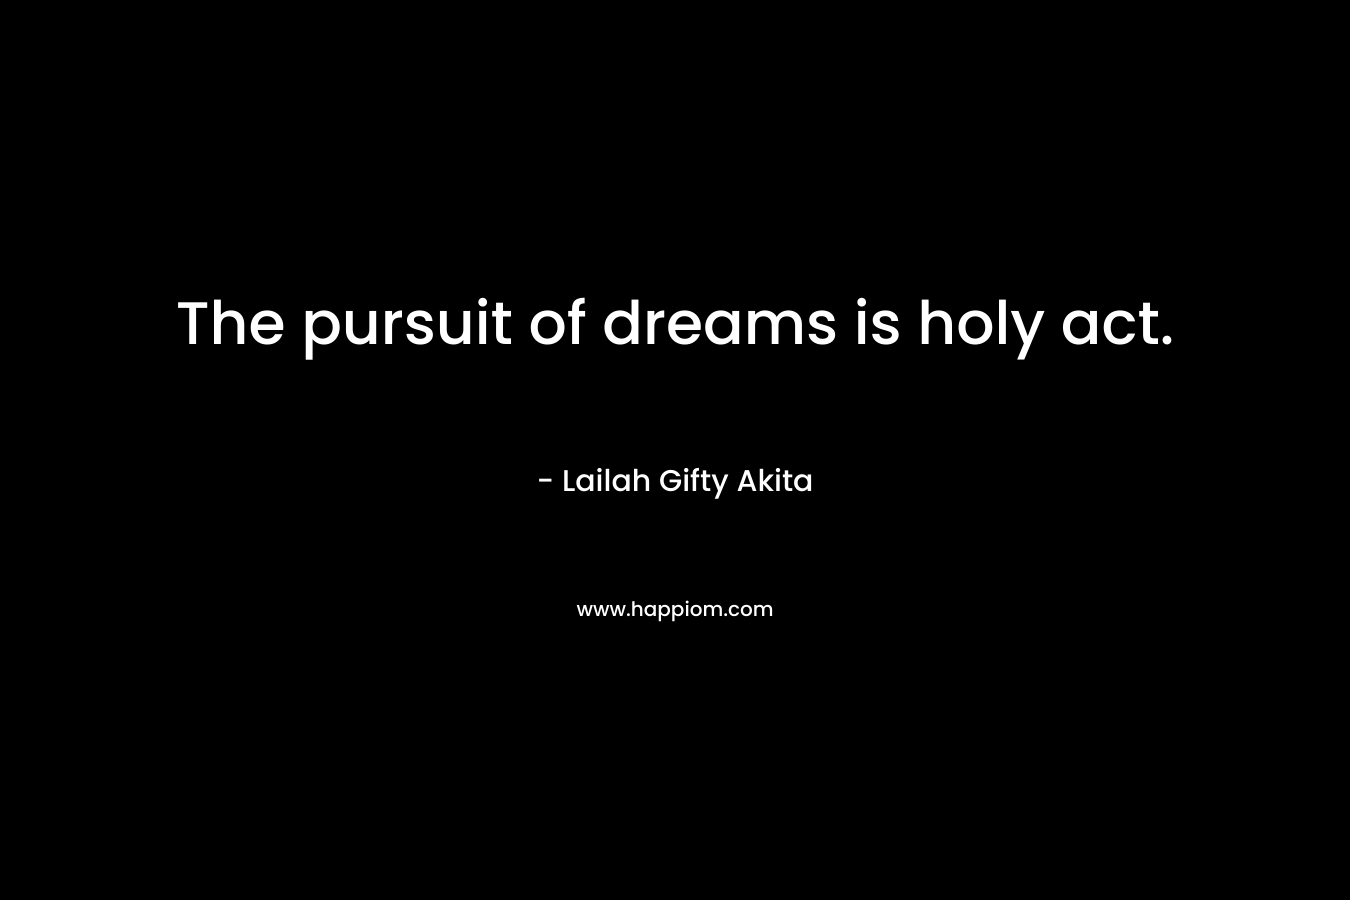 The pursuit of dreams is holy act.